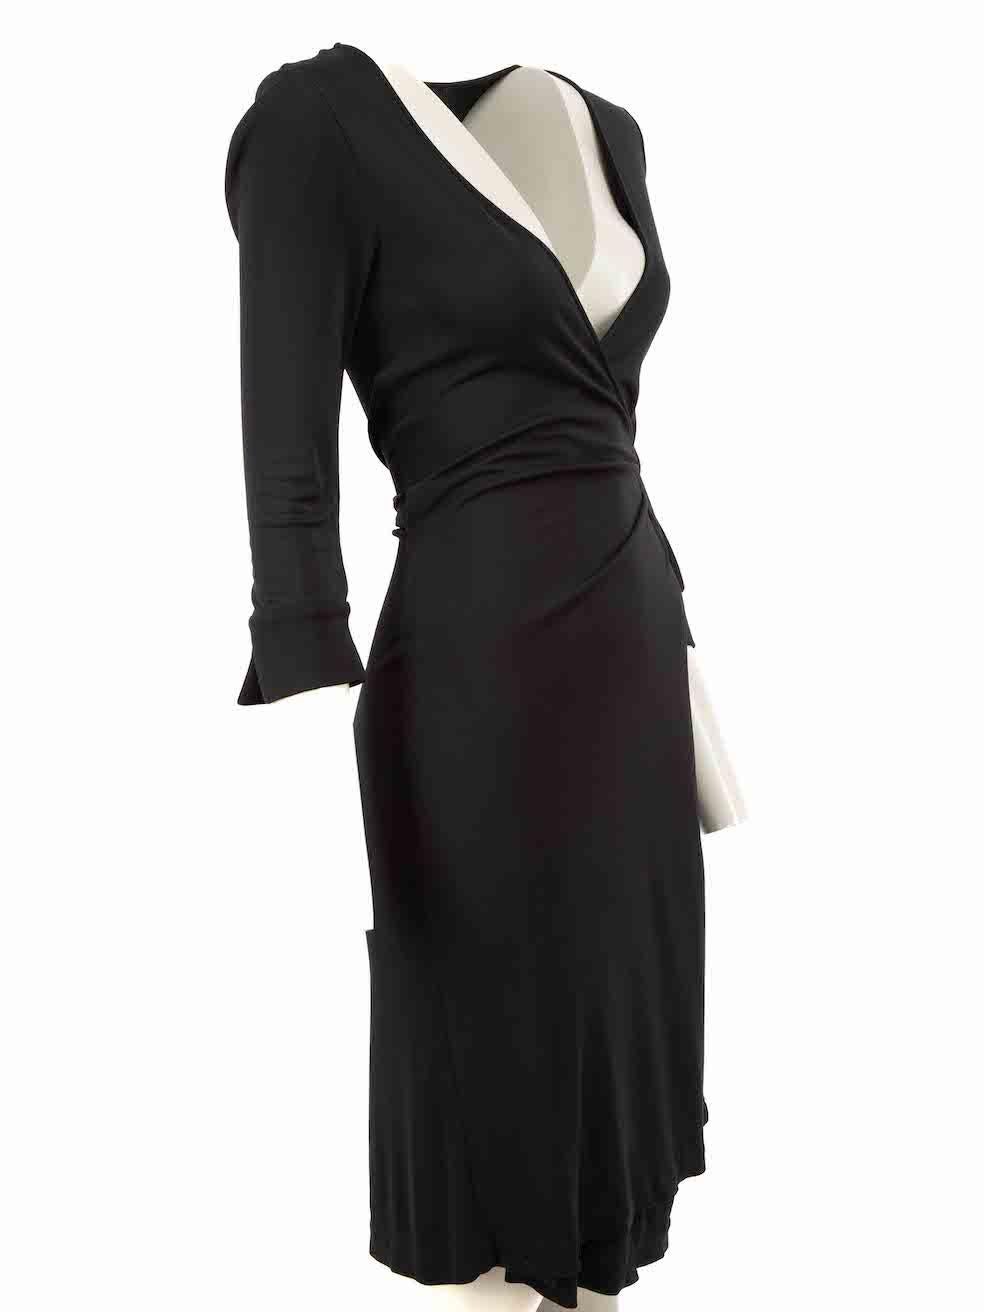 CONDITION is Very good. Minimal wear to dress is evident. Minimal wear to the right-side with small hole and the brand label has come unattached at one side on this used Diane Von Furstenberg designer resale item.
 
Details
Black
Viscose
Wrap